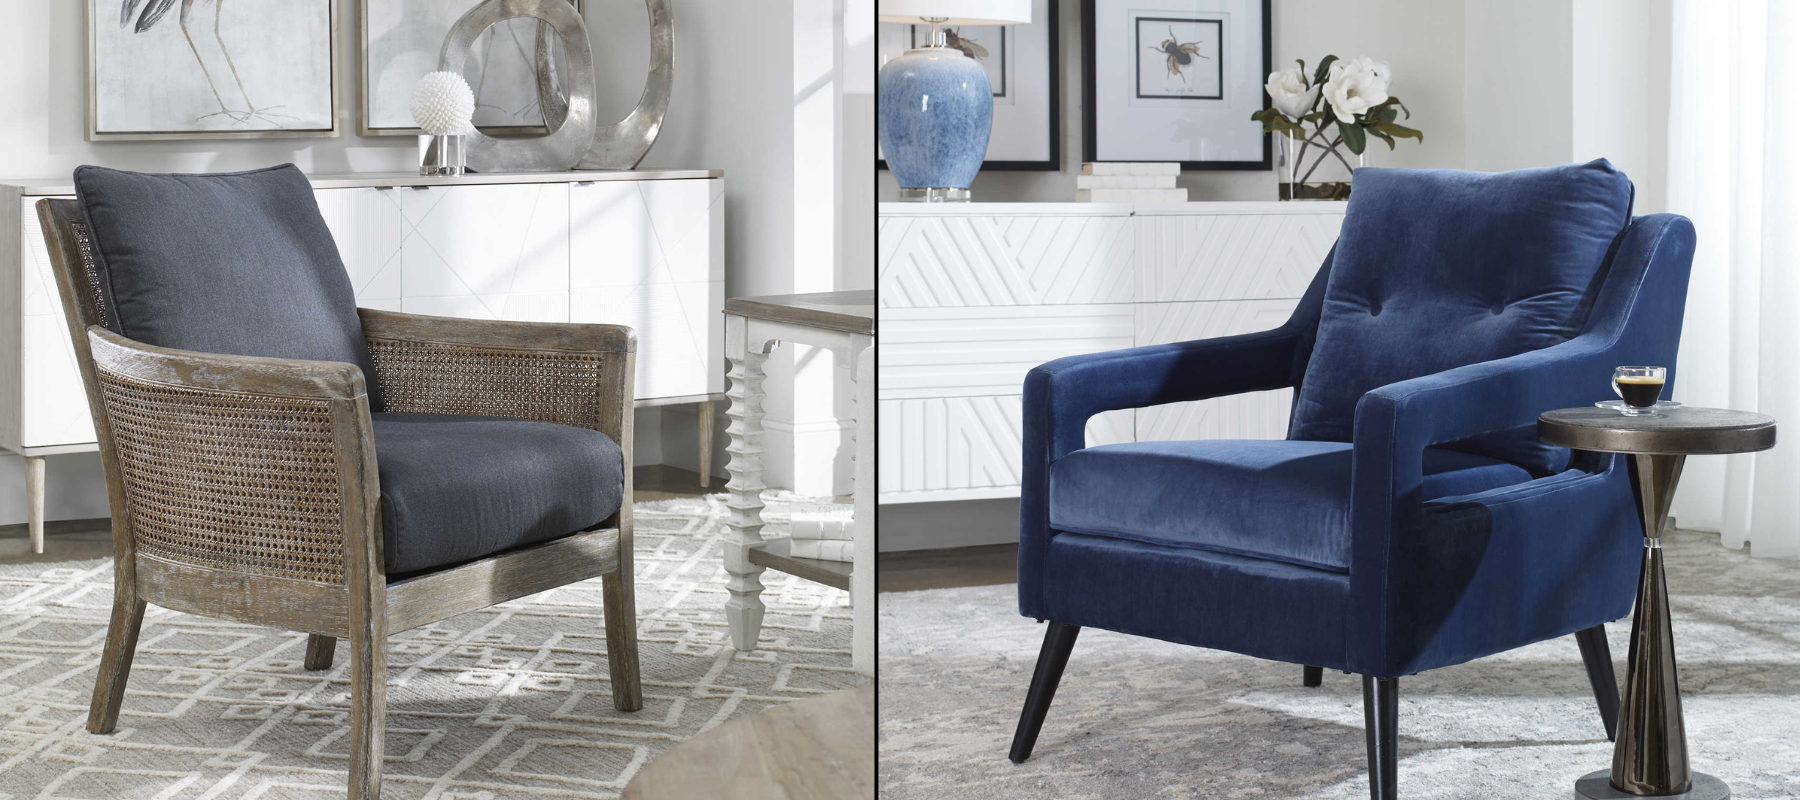 Grey & Navy blue accent chairs in furnished rooms